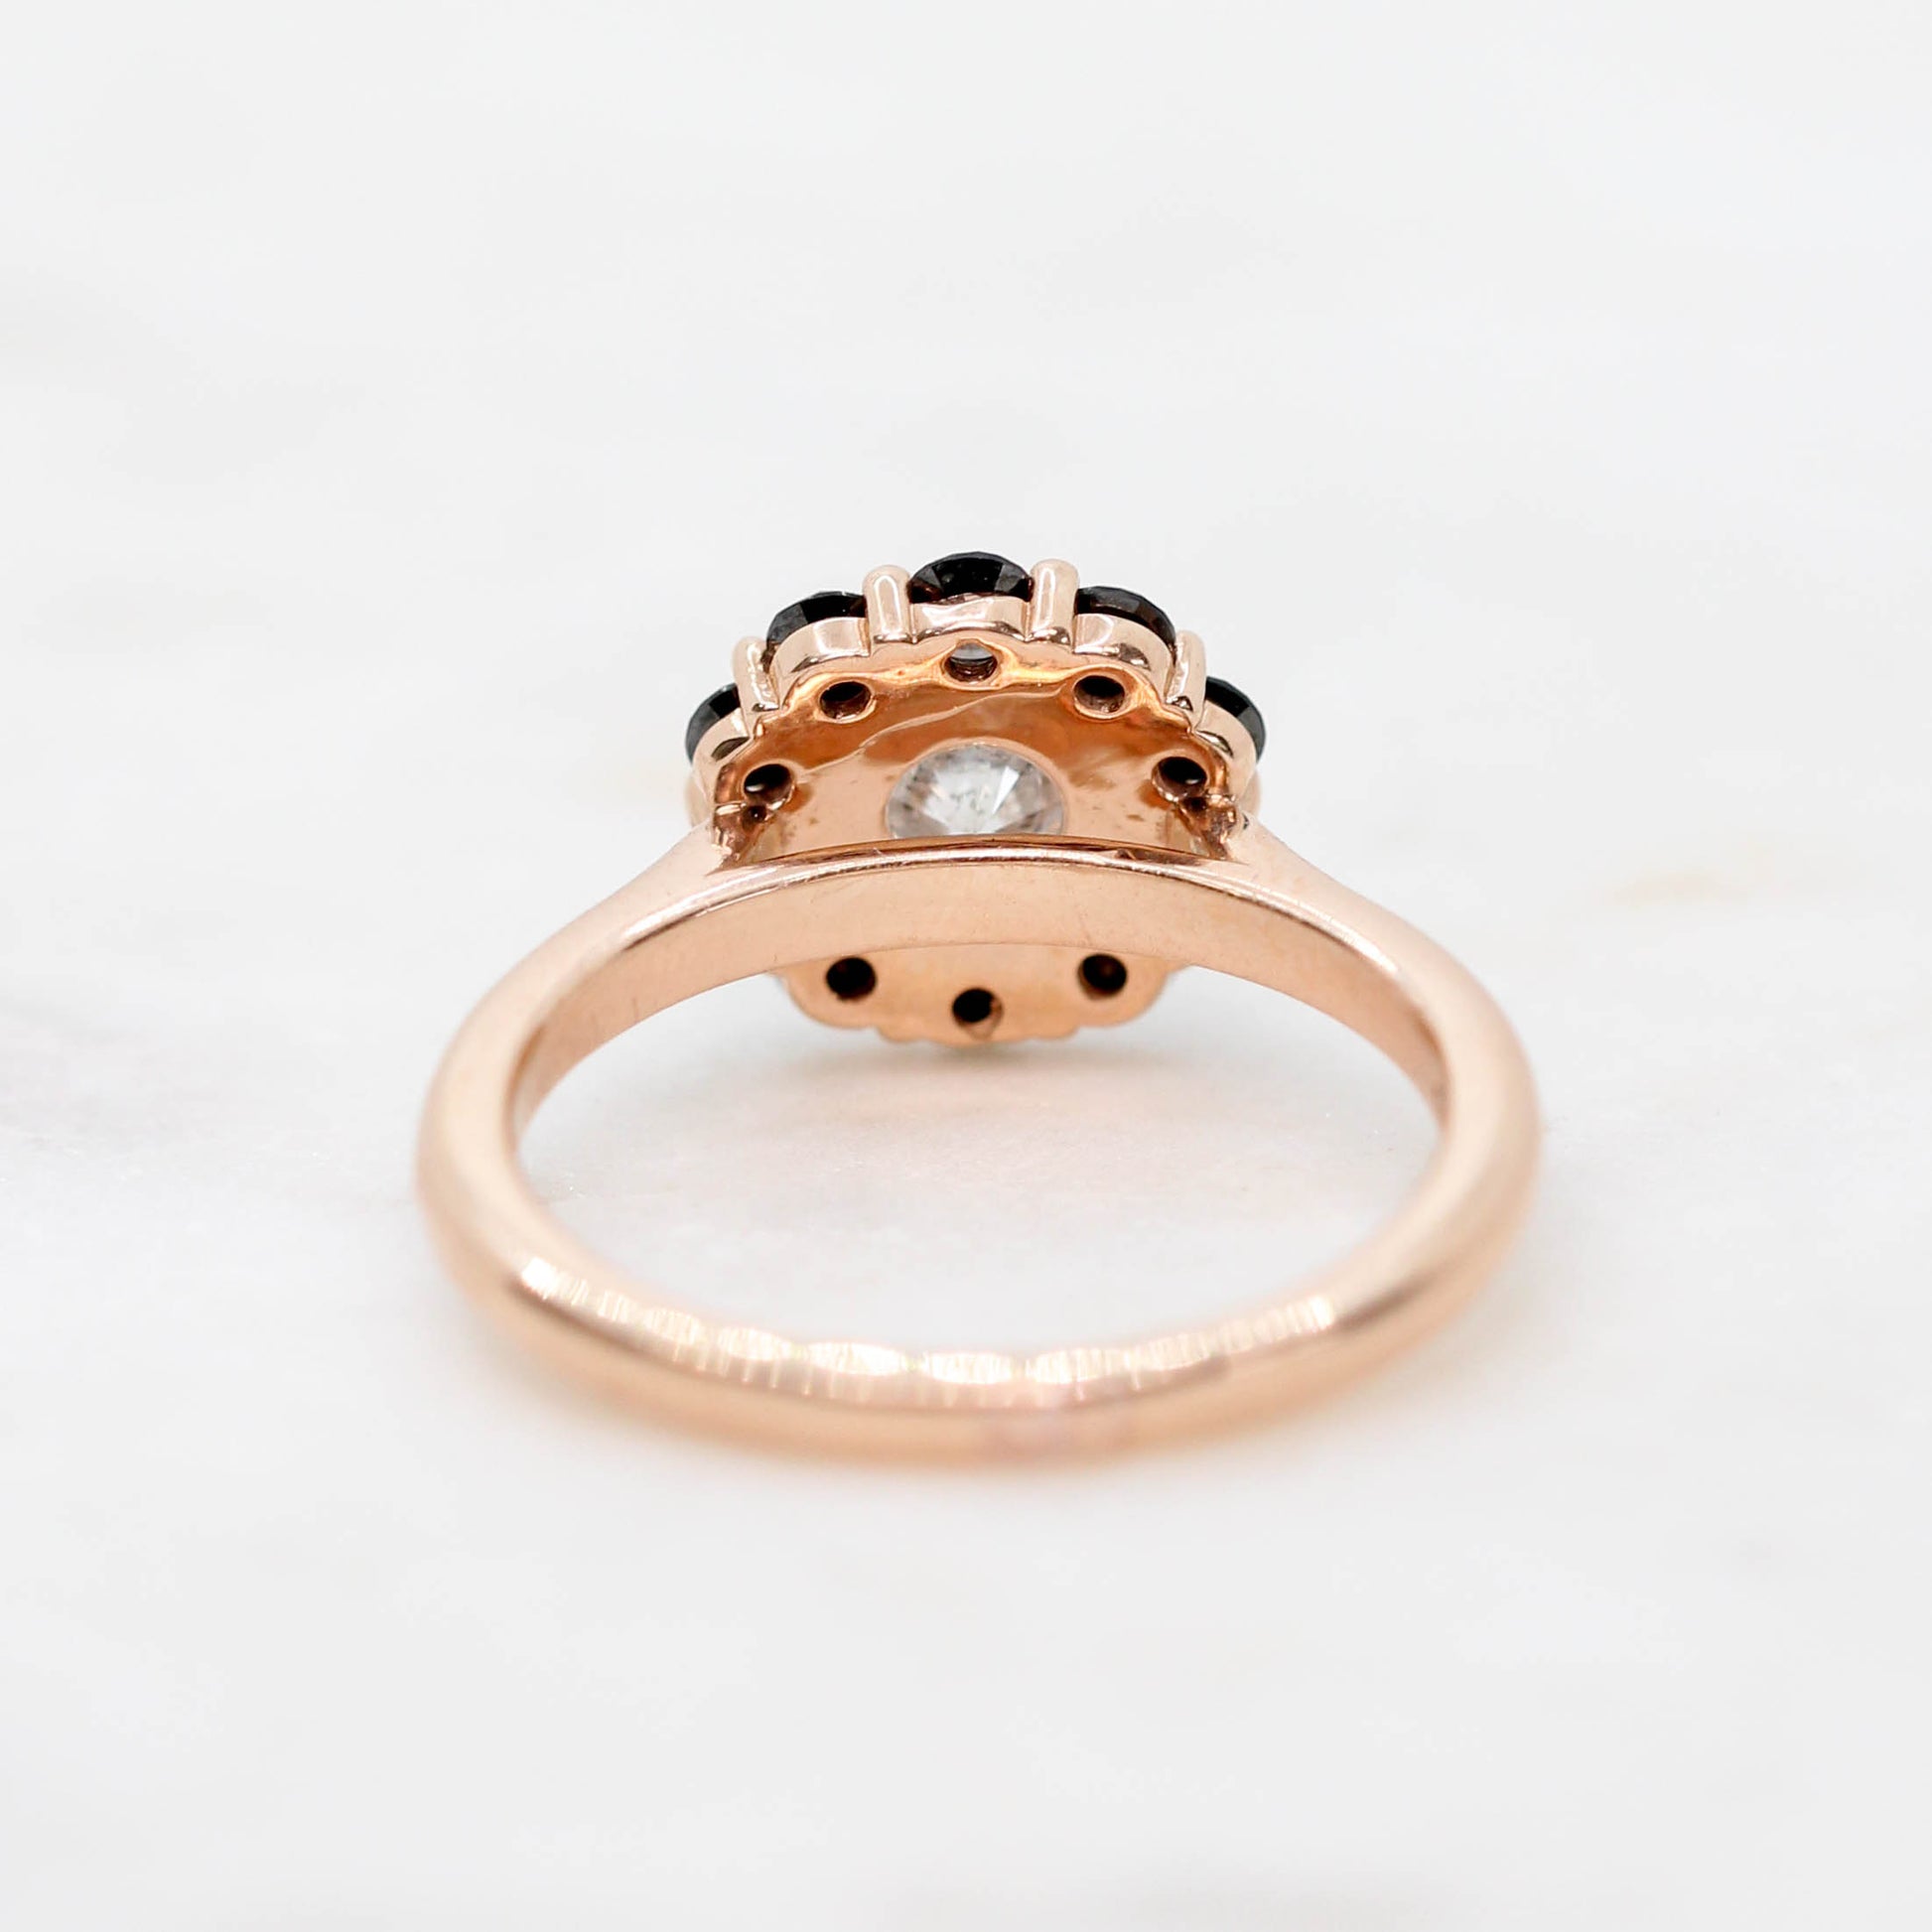 Magnolia Ring with a .70 ct Misty Celestial Diamond and Black Diamond Accents in 14k Rose Gold - Ready to Size and Ship - Midwinter Co. Alternative Bridal Rings and Modern Fine Jewelry